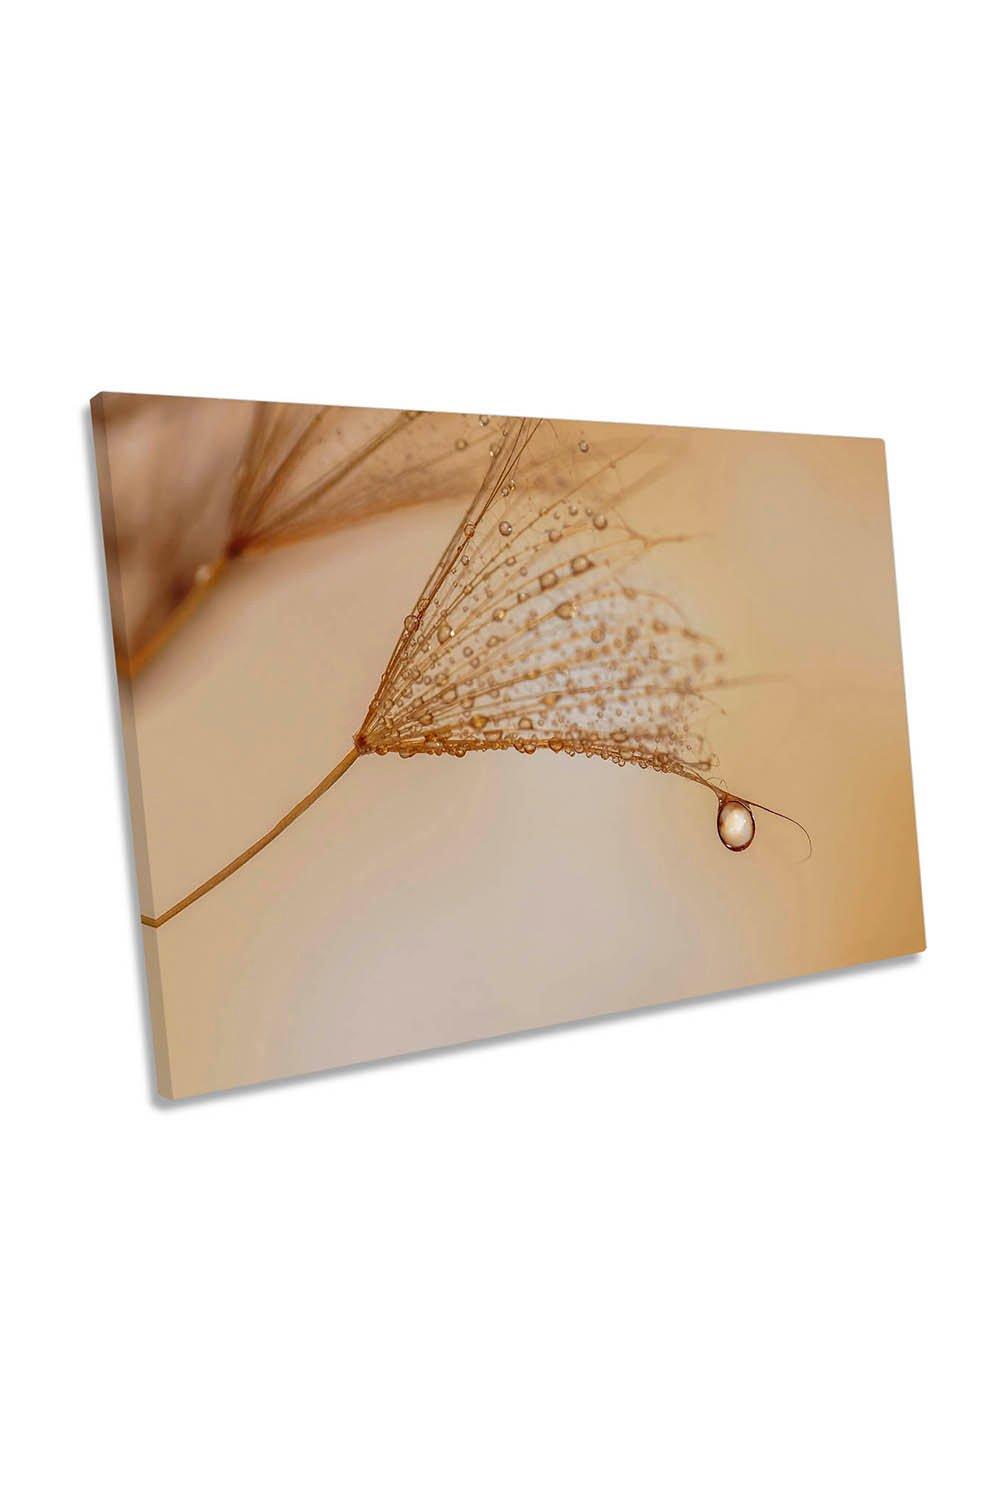 J 'Adore Water Droplet Floral Canvas Wall Art Picture Print